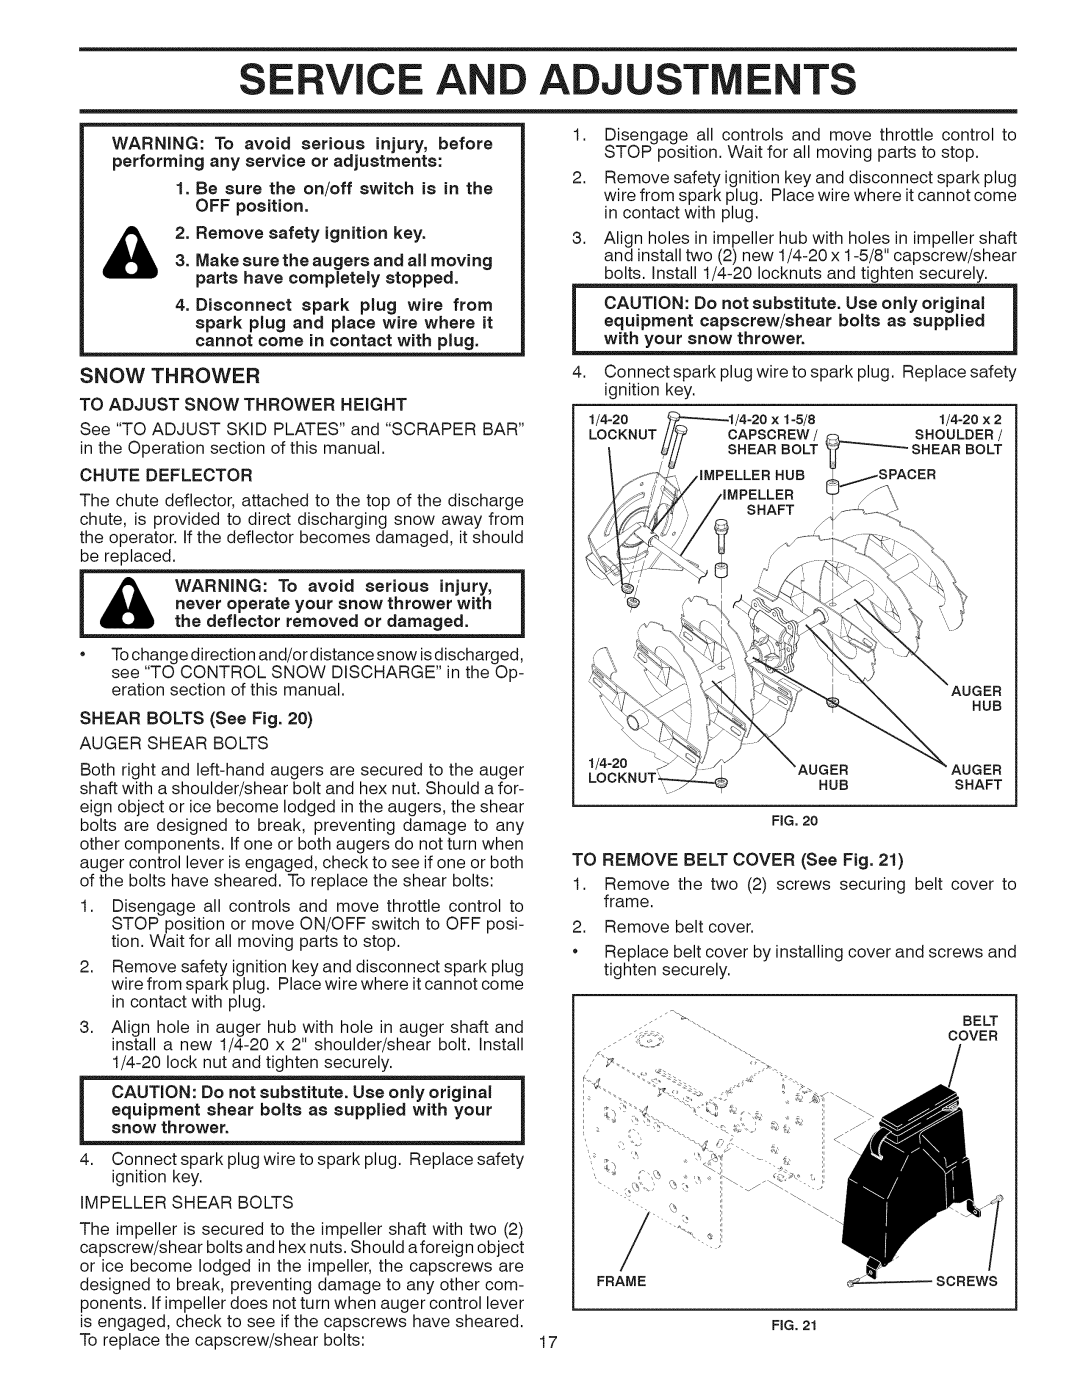 Craftsman 917.881064 owner manual SE iCE, Adj Ents, To Adjust Snow Thrower Height, Chute Deflector 